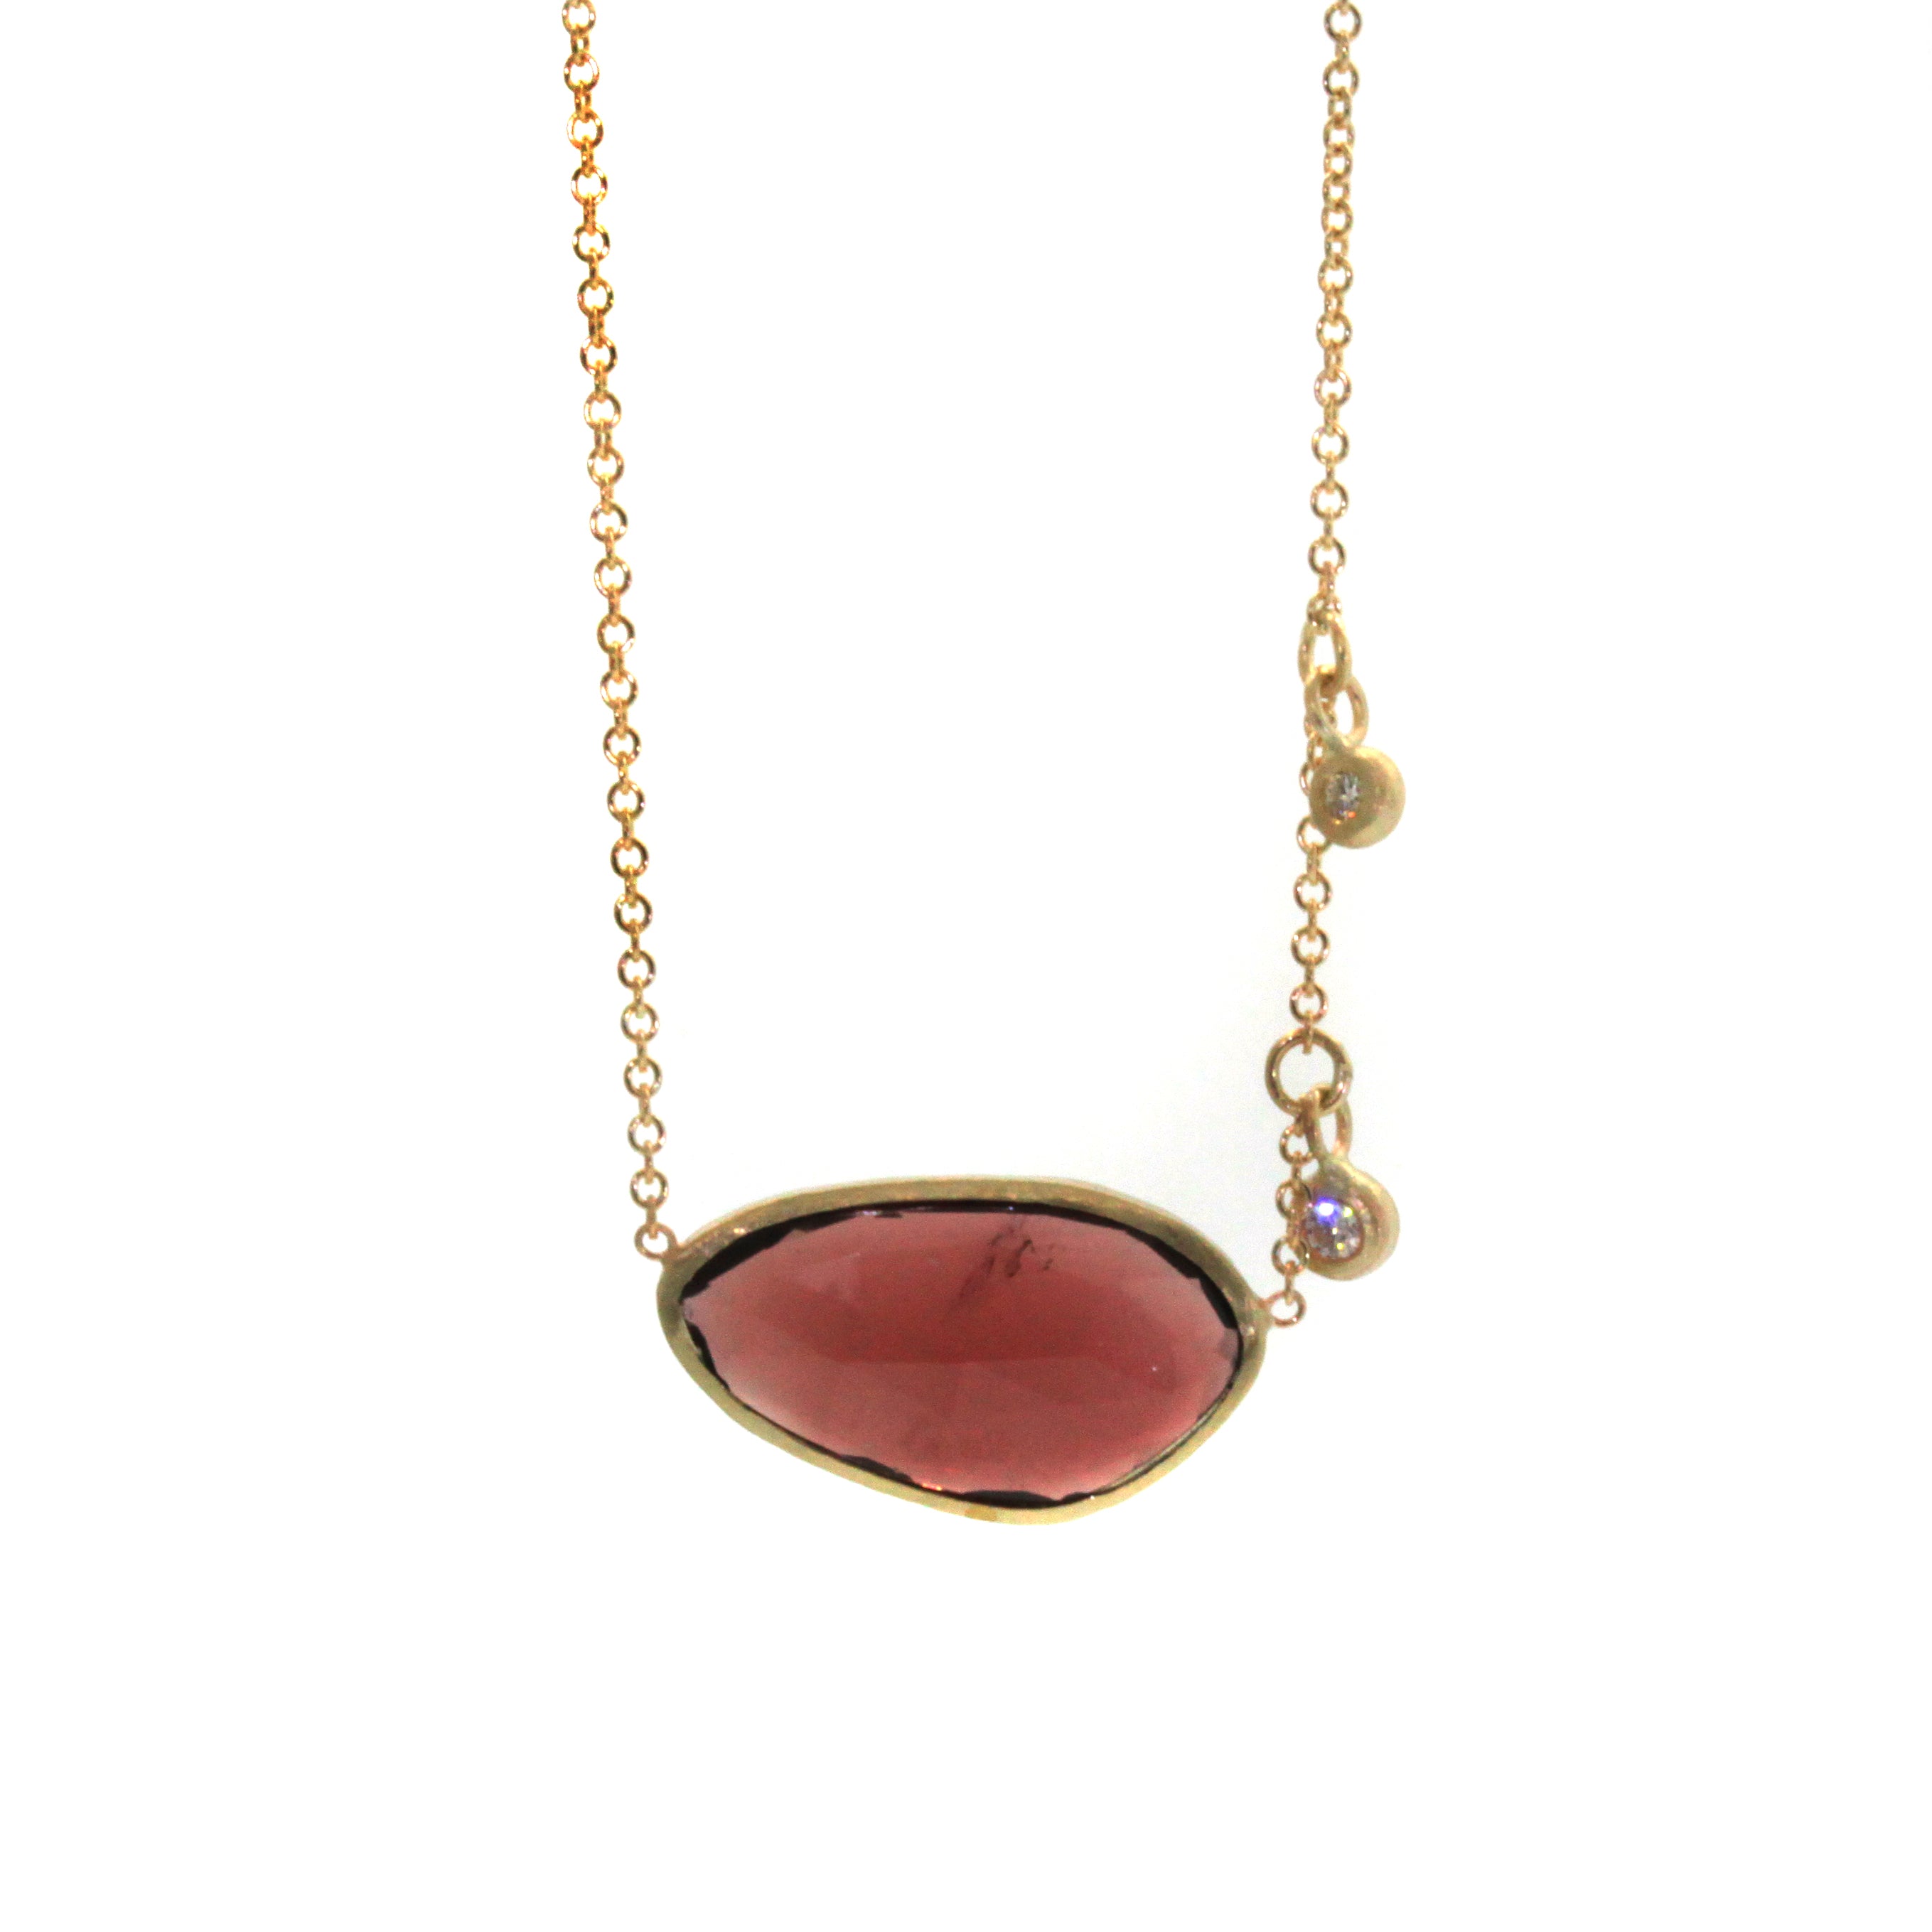 Garnet & Diamond Necklace hand crafted in Houston, Texas by Rebecca Lankford. Each stone is hand picked and individually set upon order of necklace. 